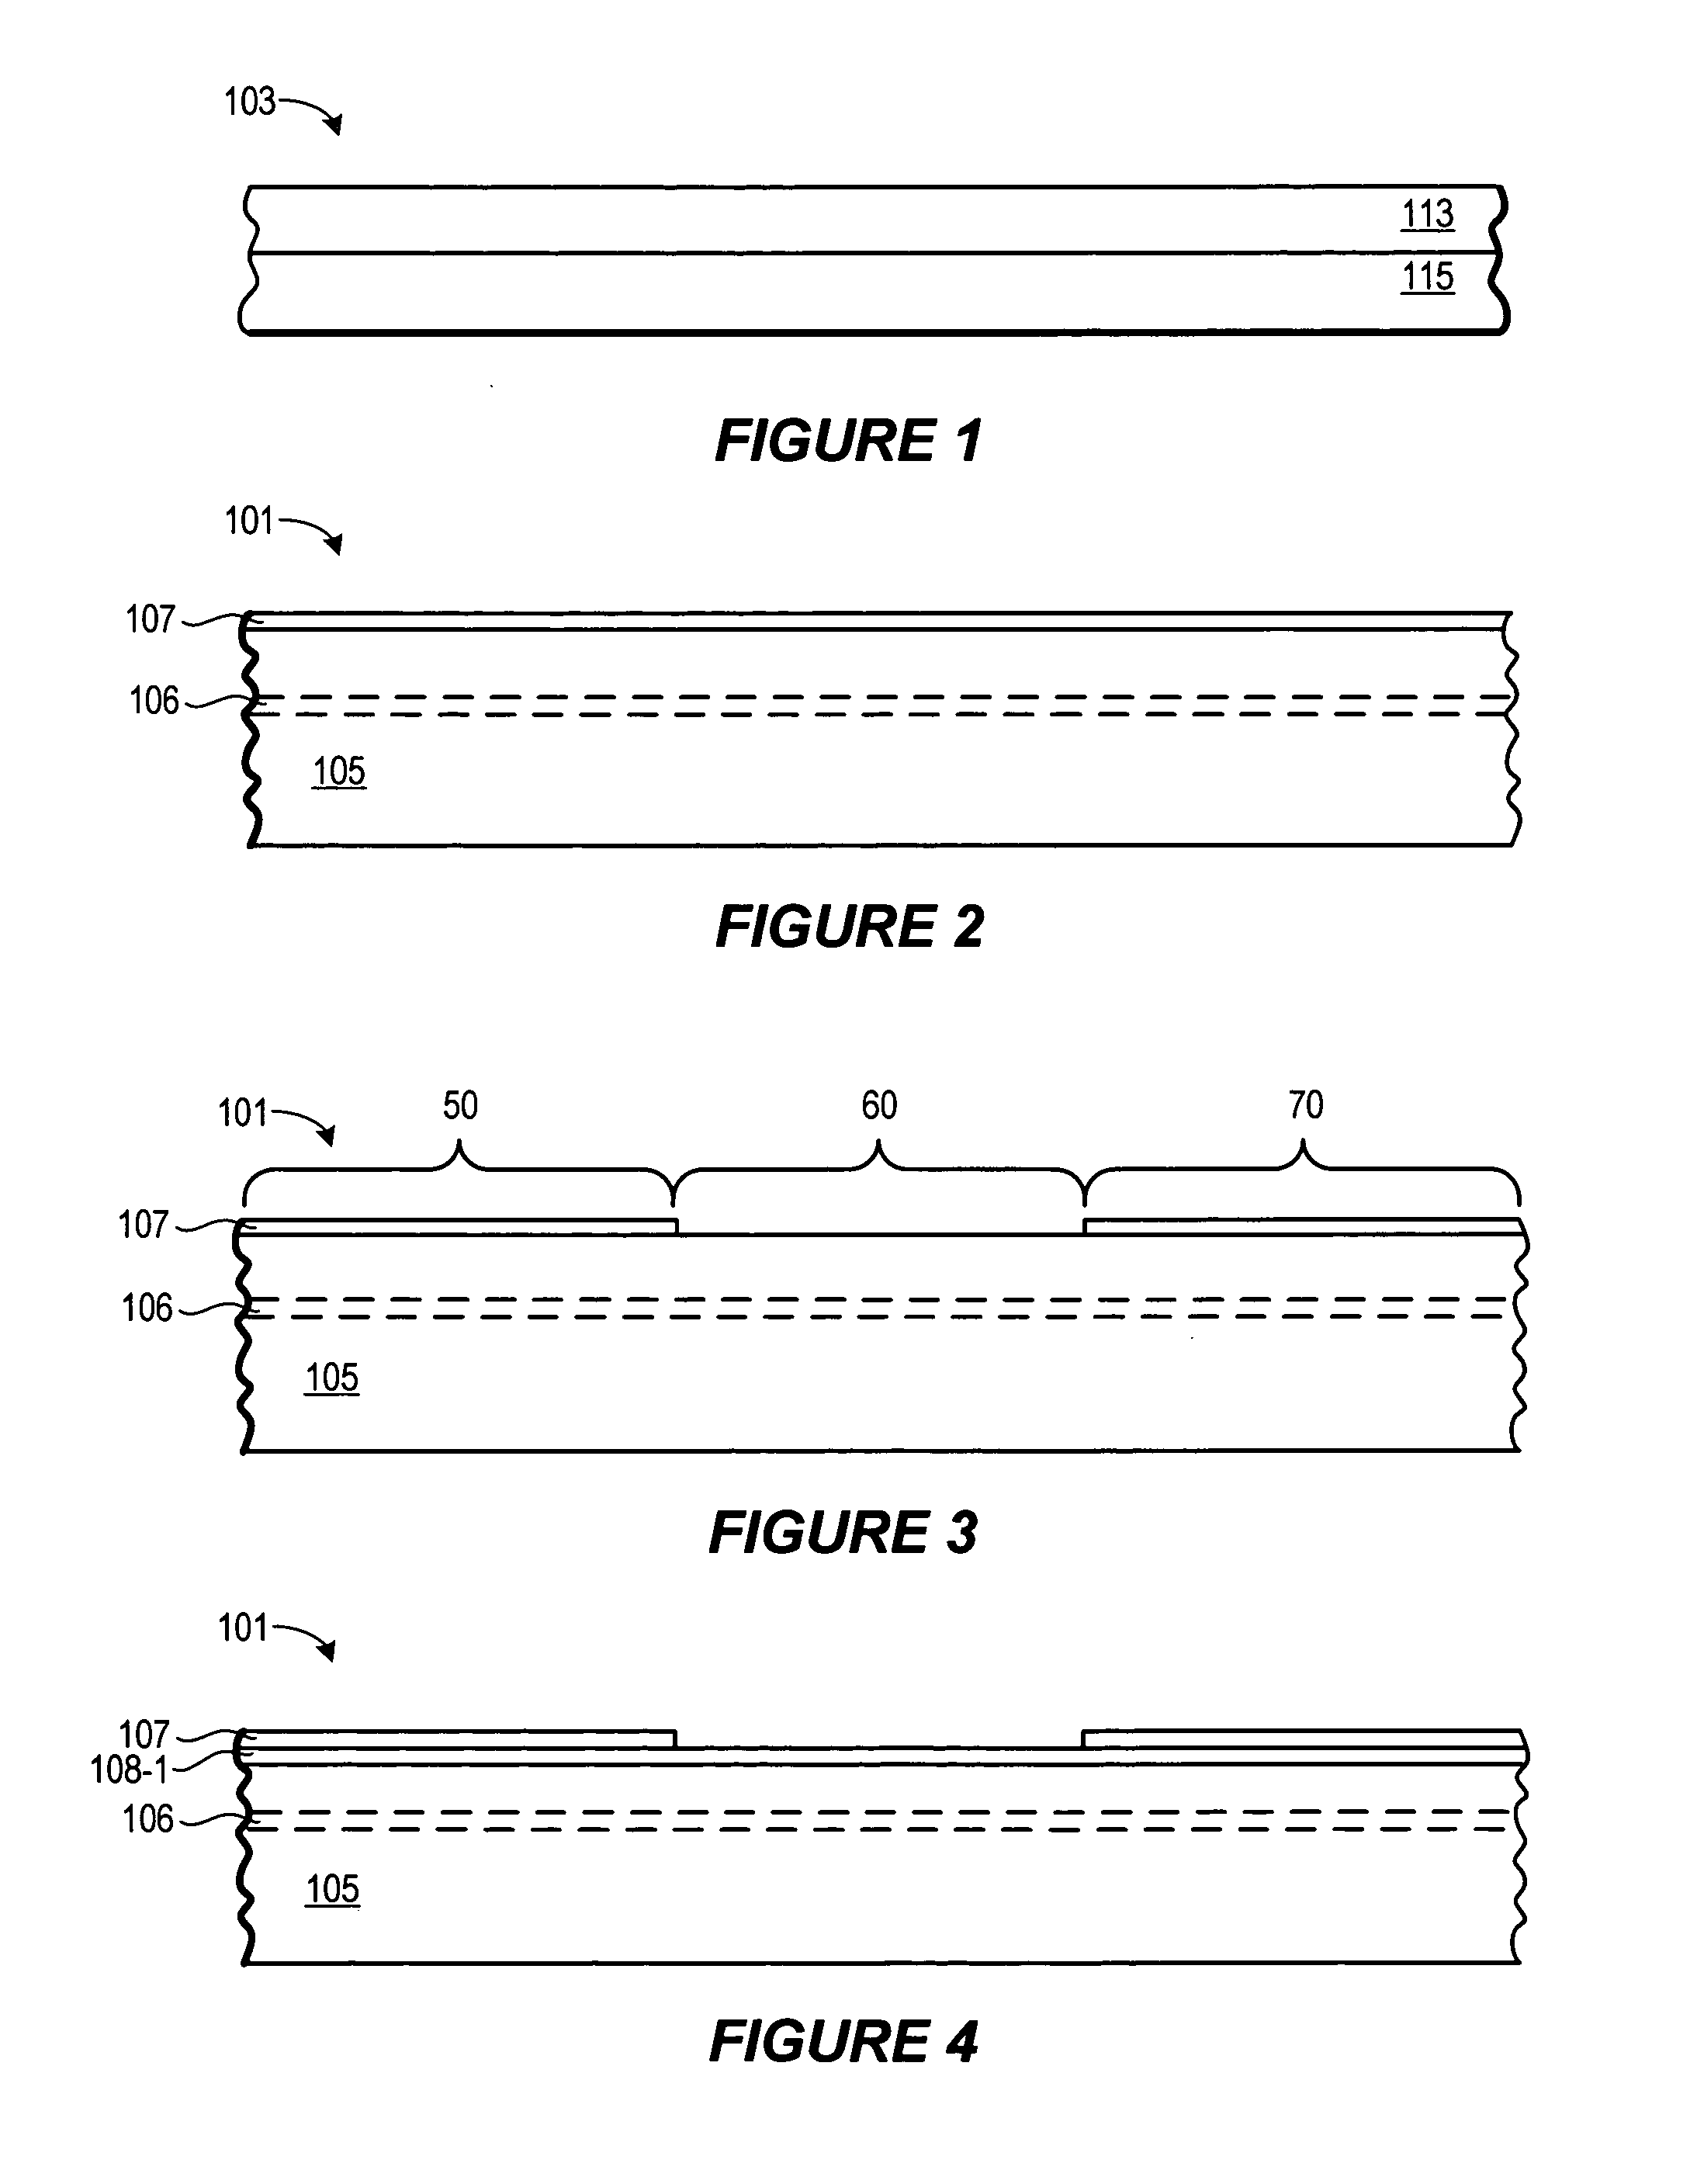 Structure and manufacturing method of multi-gate dielectric thicknesses for planar double gate device having multi-threshold voltages